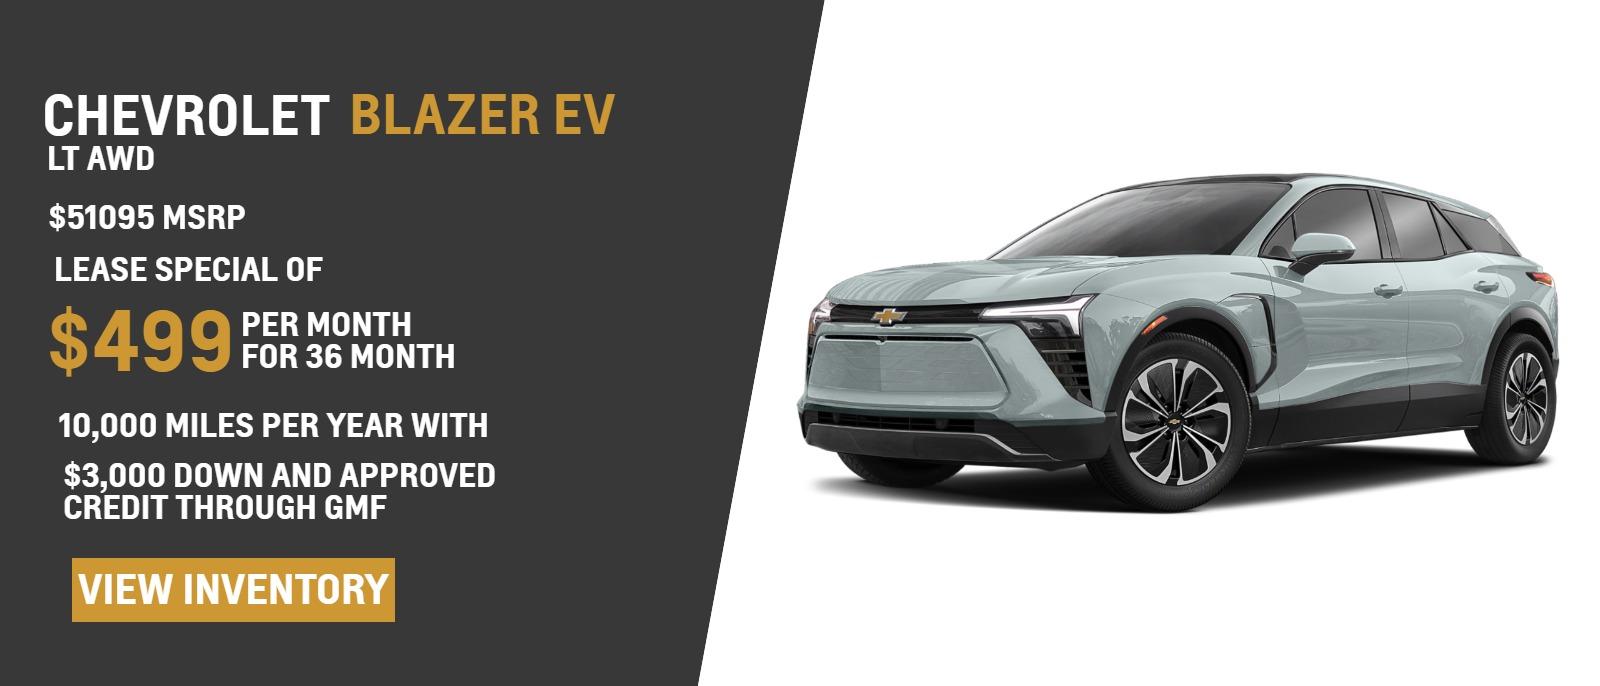 Lease special of $499 per month on Blazer EV LT AWD ($51095 MSRP) 36 months 10,000 miles per year with $3000 down and approved credit through GMF (Expires 4/30/2024)